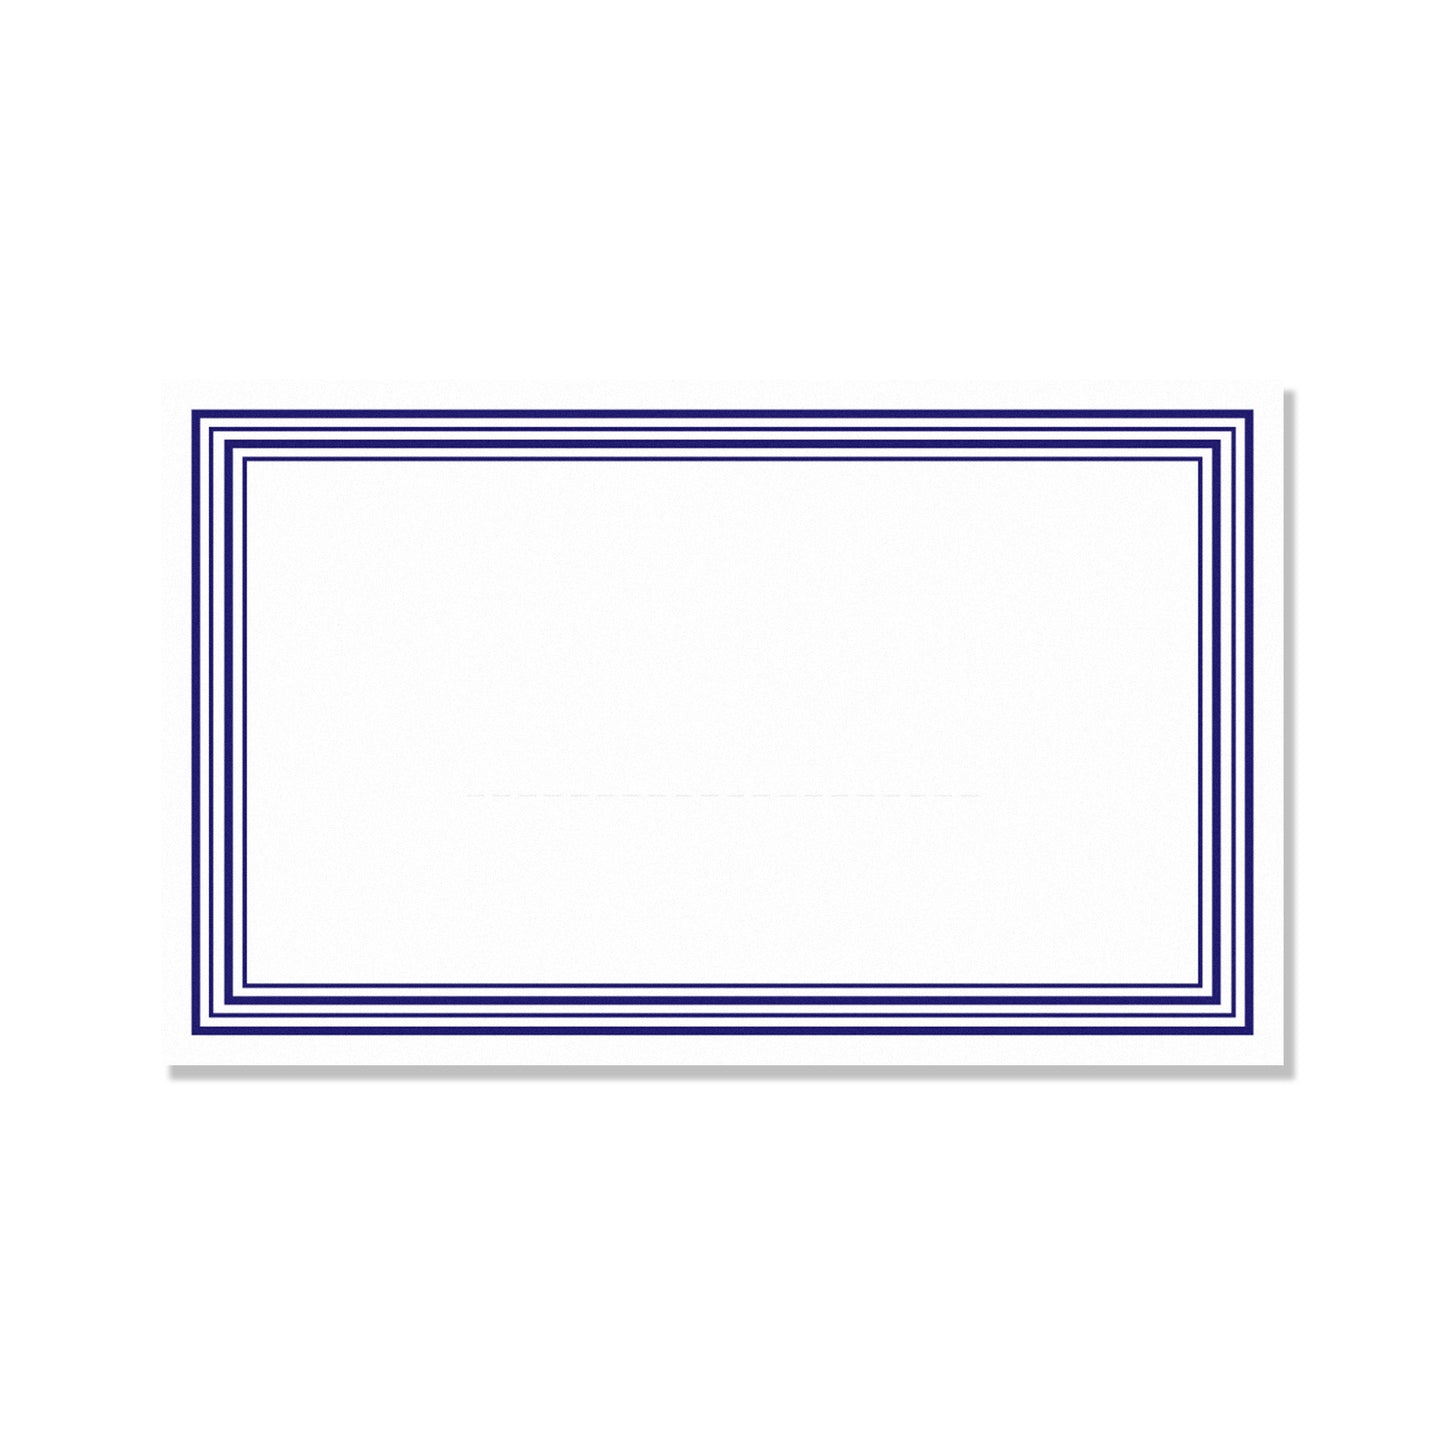 CLASSIC PLACE CARDS. (PACK OF 10)